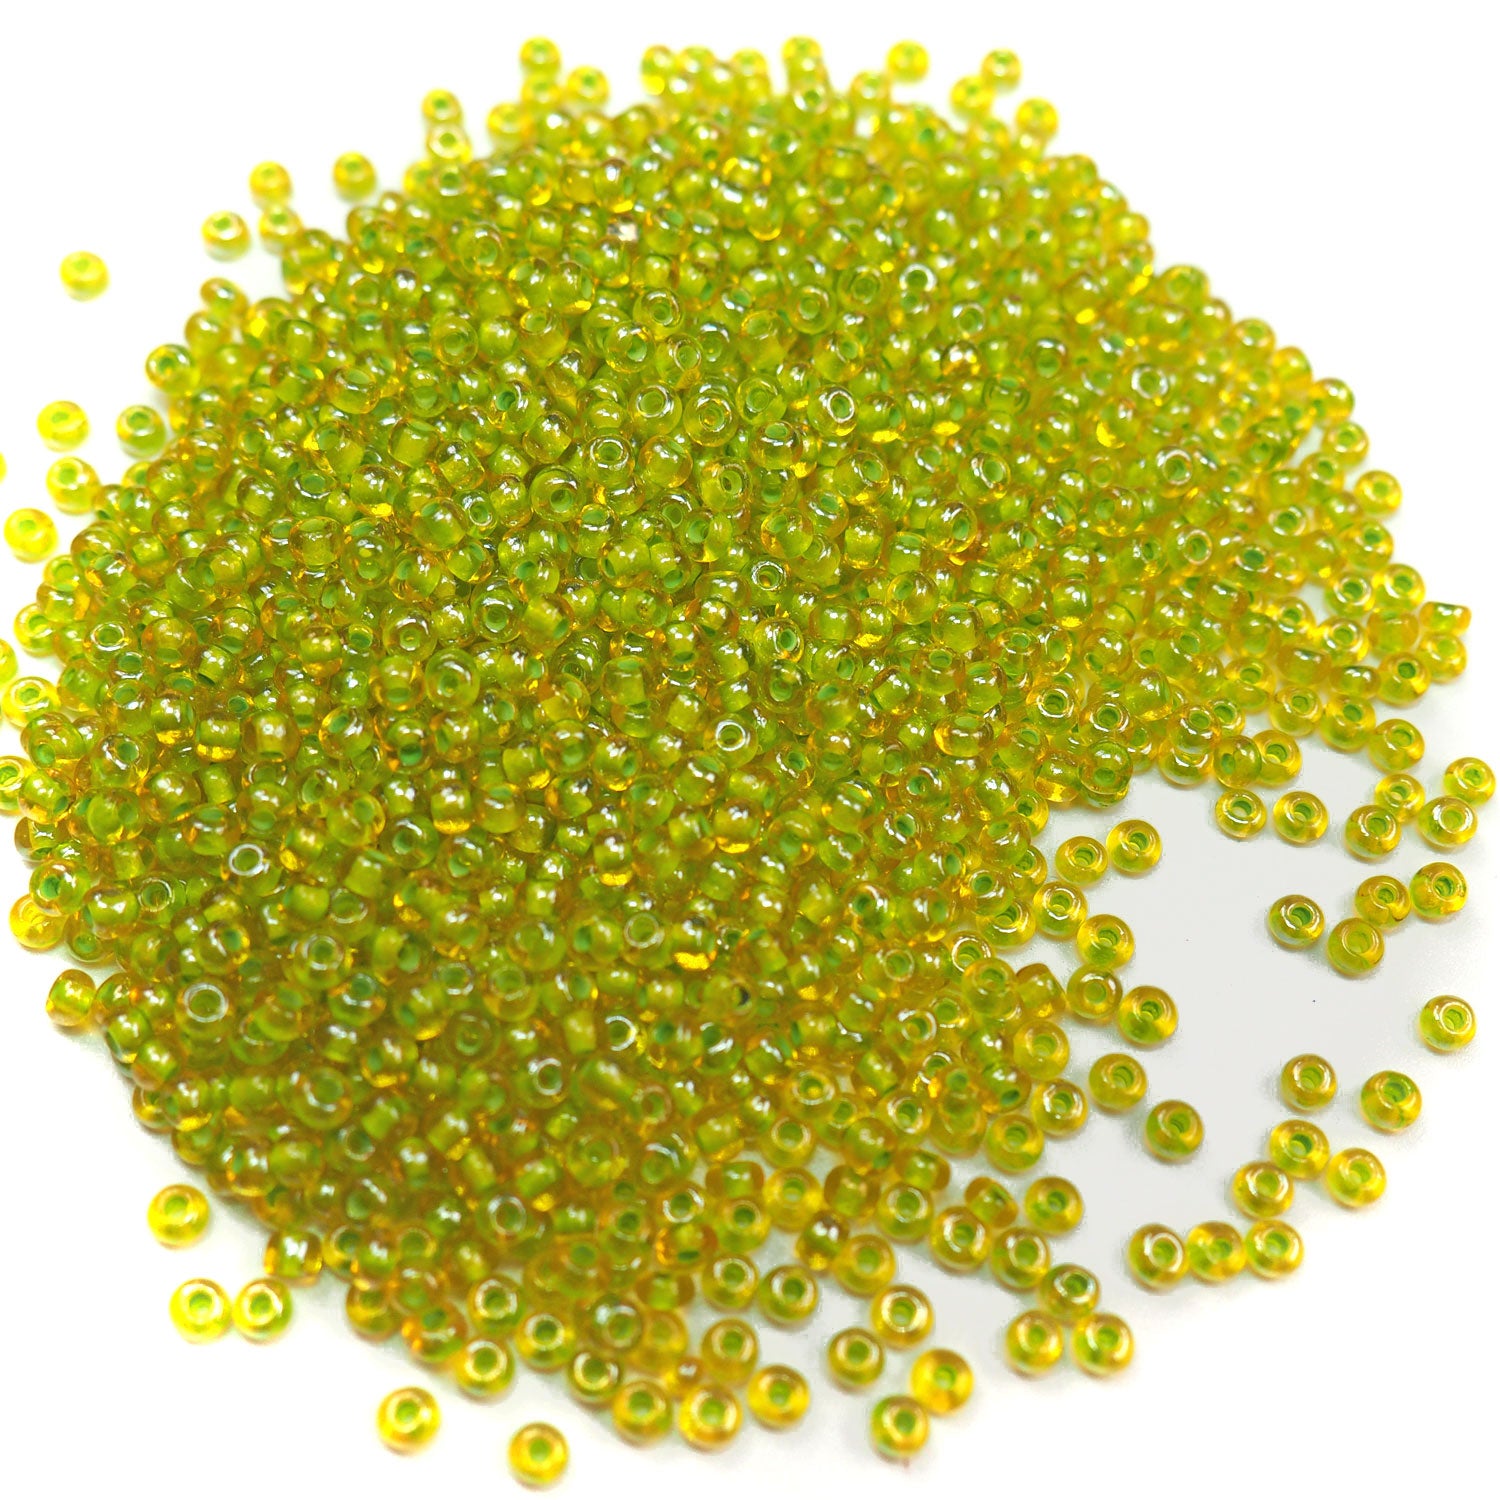 Rocailles size 9/0 (2.6mm) Yellow Green Rainbow Lined, Preciosa Ornela Traditional Czech Glass Seed Beads, 30grams (1 oz), P931